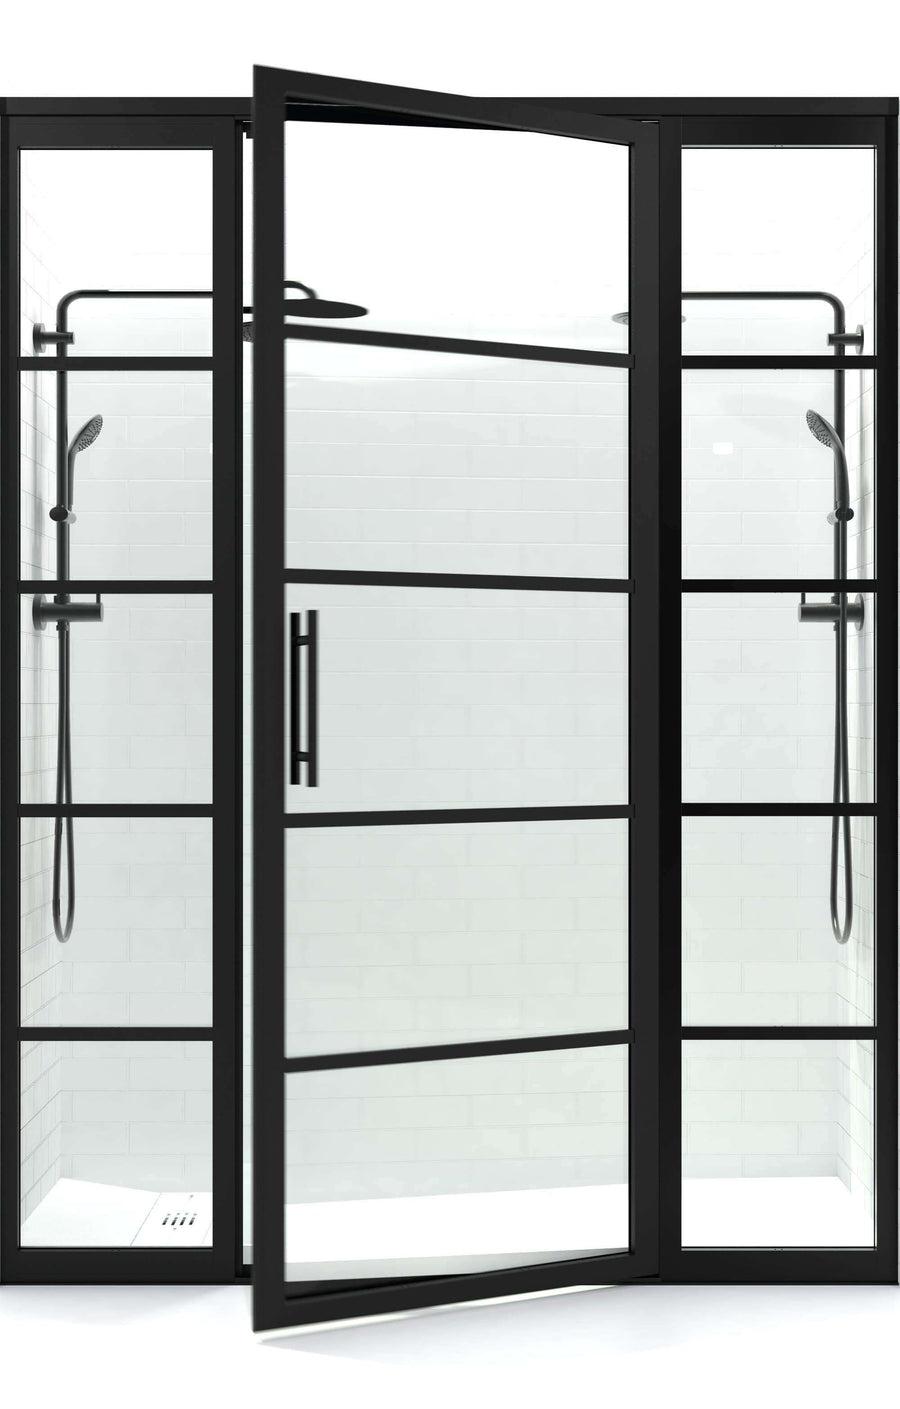 Industrial Balck Grid Style Shower Door | Gridscape Series GS2 with Clear Glass | Door with 2 Inline Panels